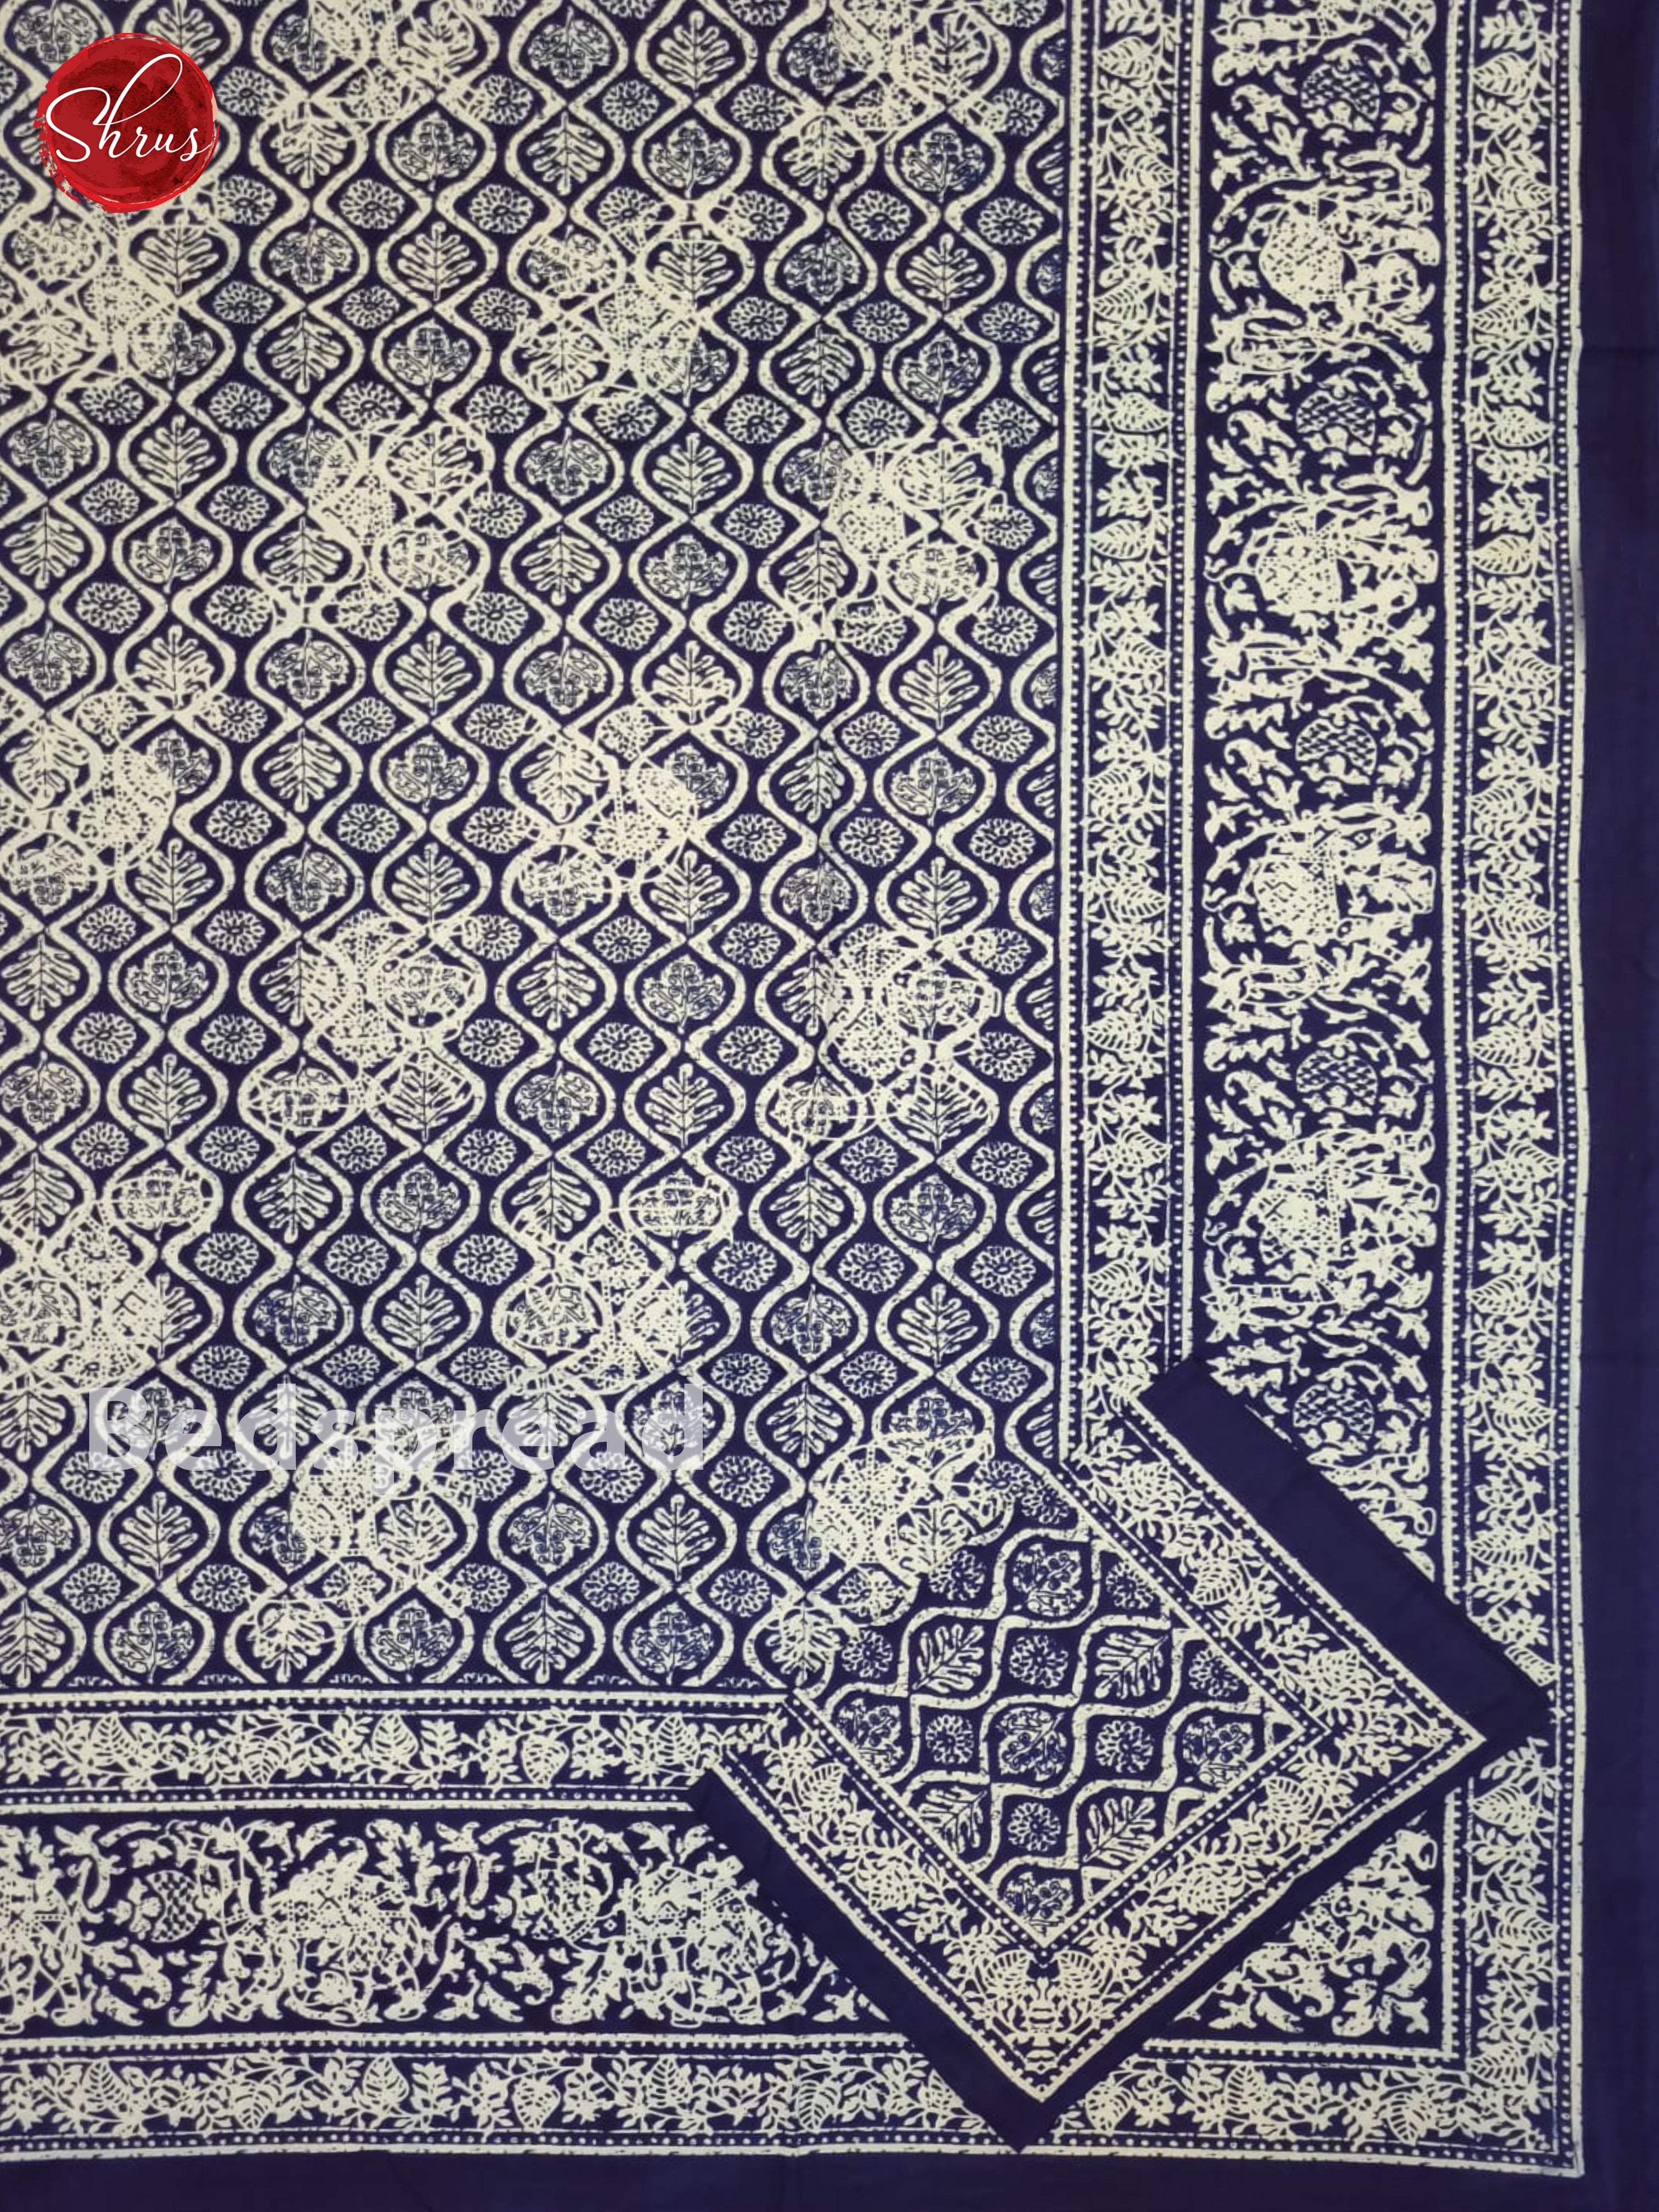 Blue & White - Jaipuri Double Printed Bed Spread